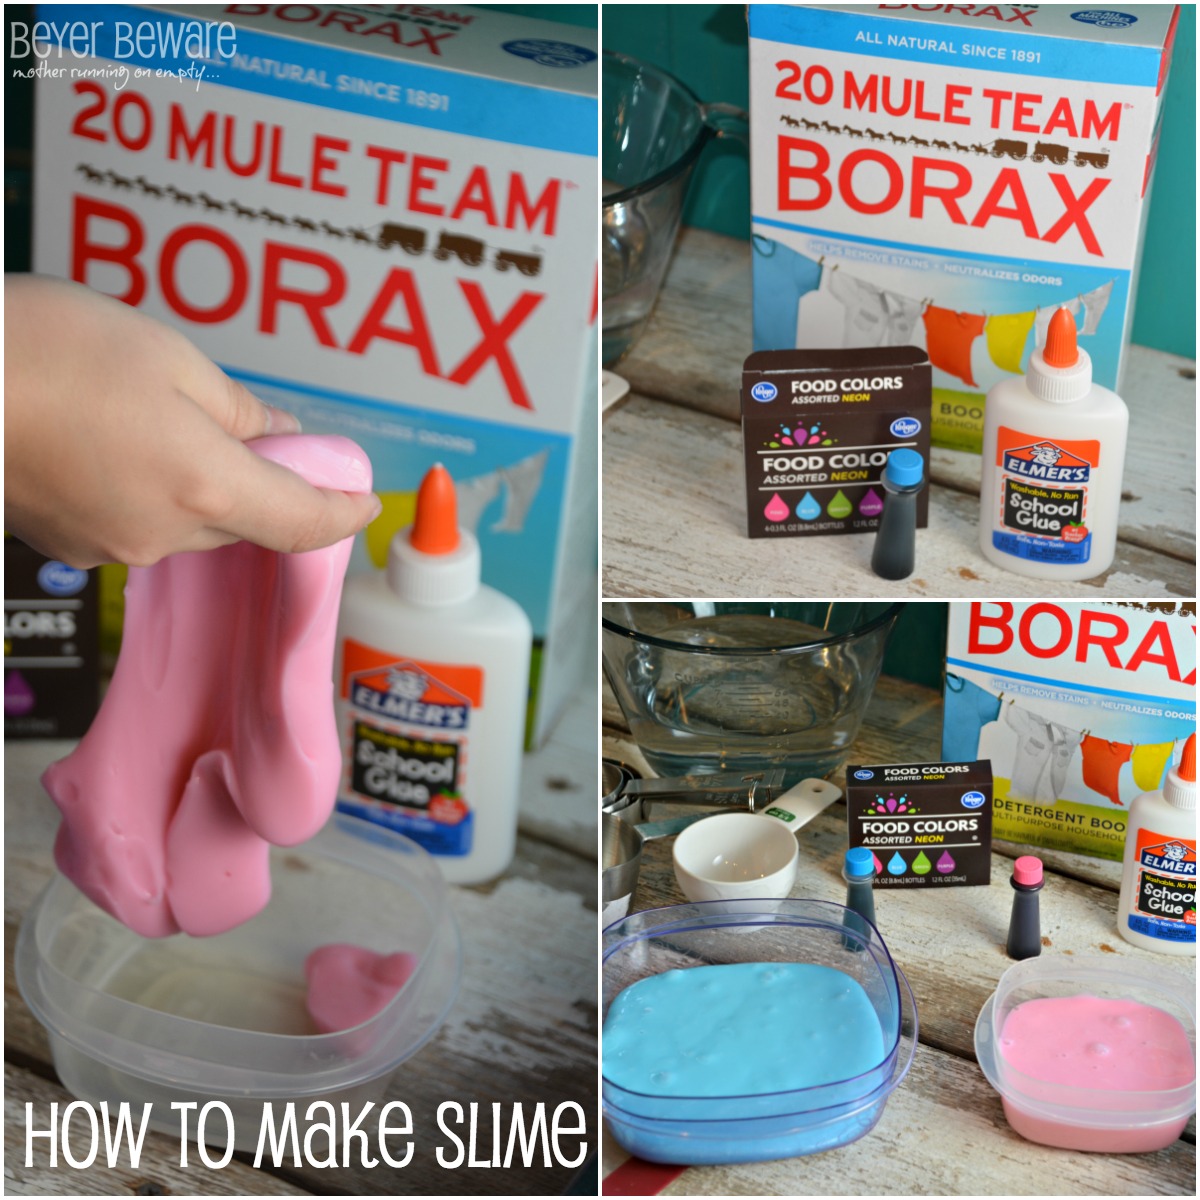 How to Make Slime Without Borax - Come Wag Along